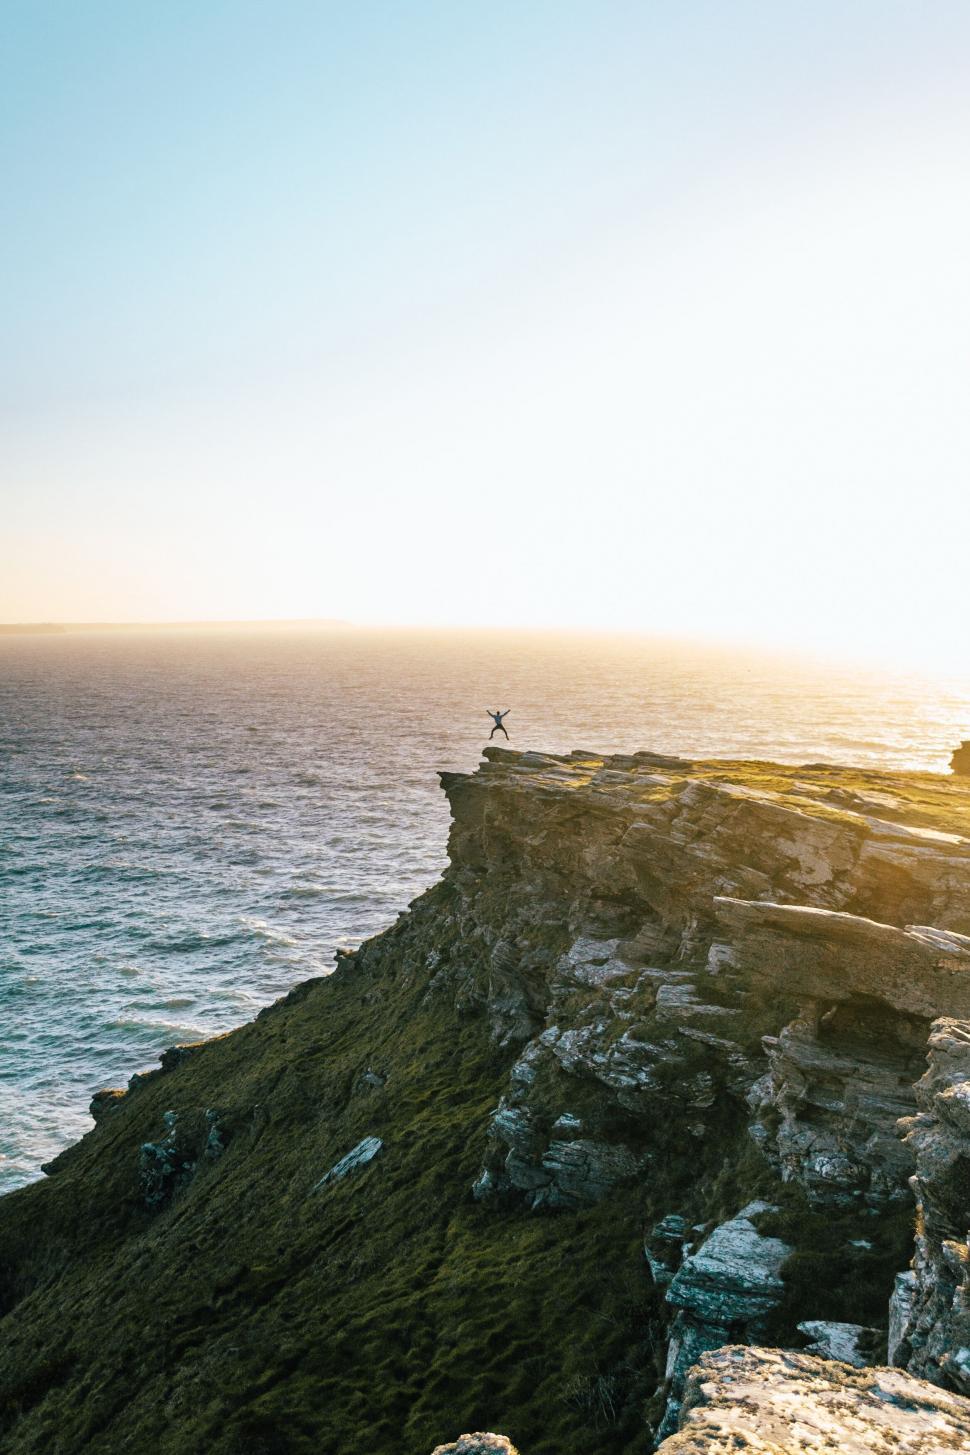 Free Image of Person on cliff edge with outstretched arms at sunset 